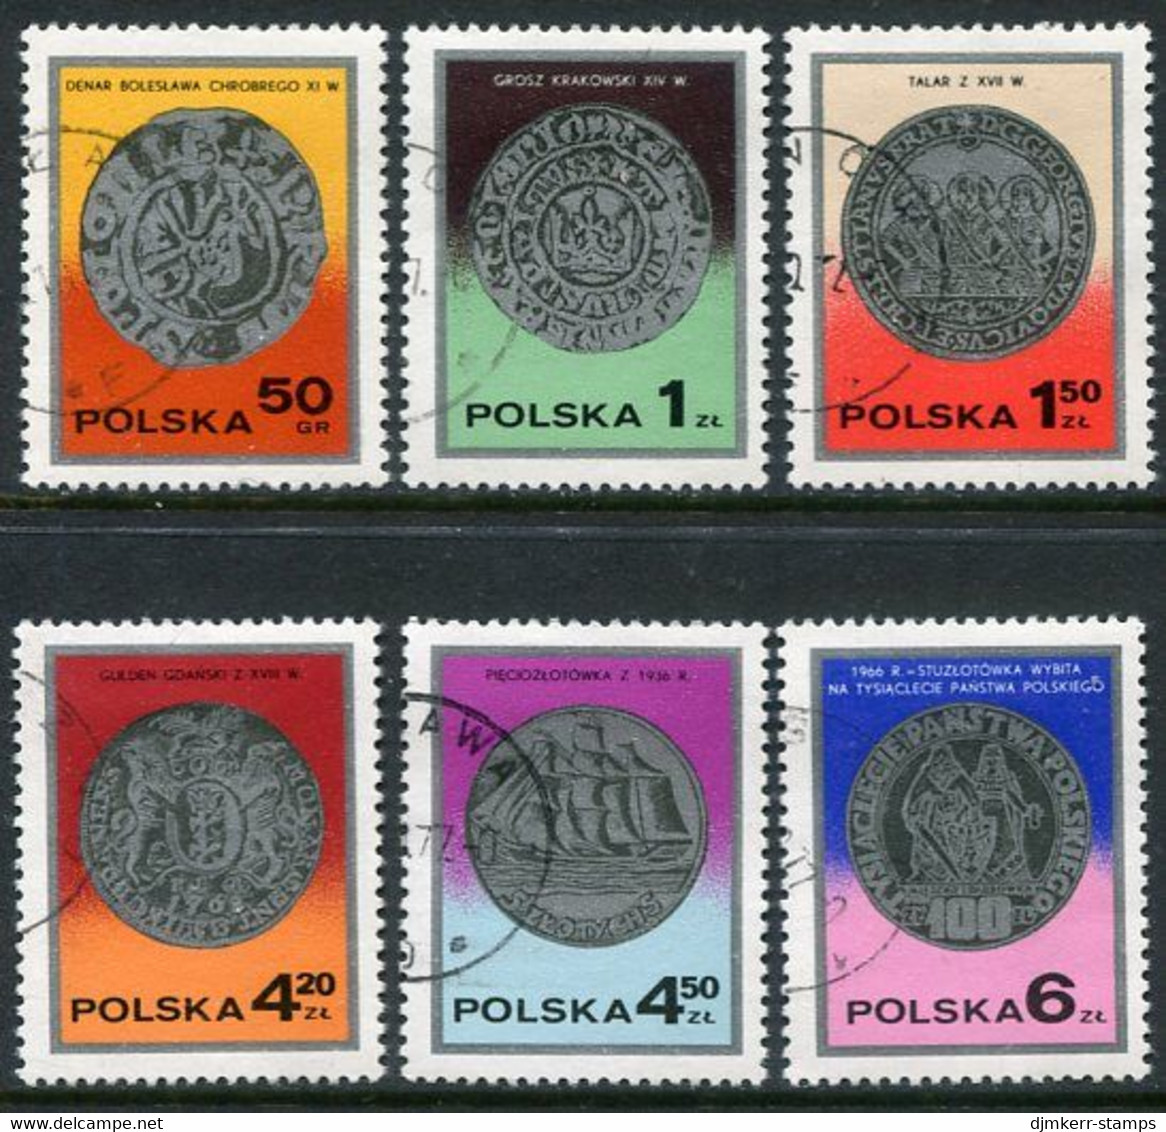 POLAND 1977 Stamp Day: Coins Used.  Michel 2525-30 - Usati